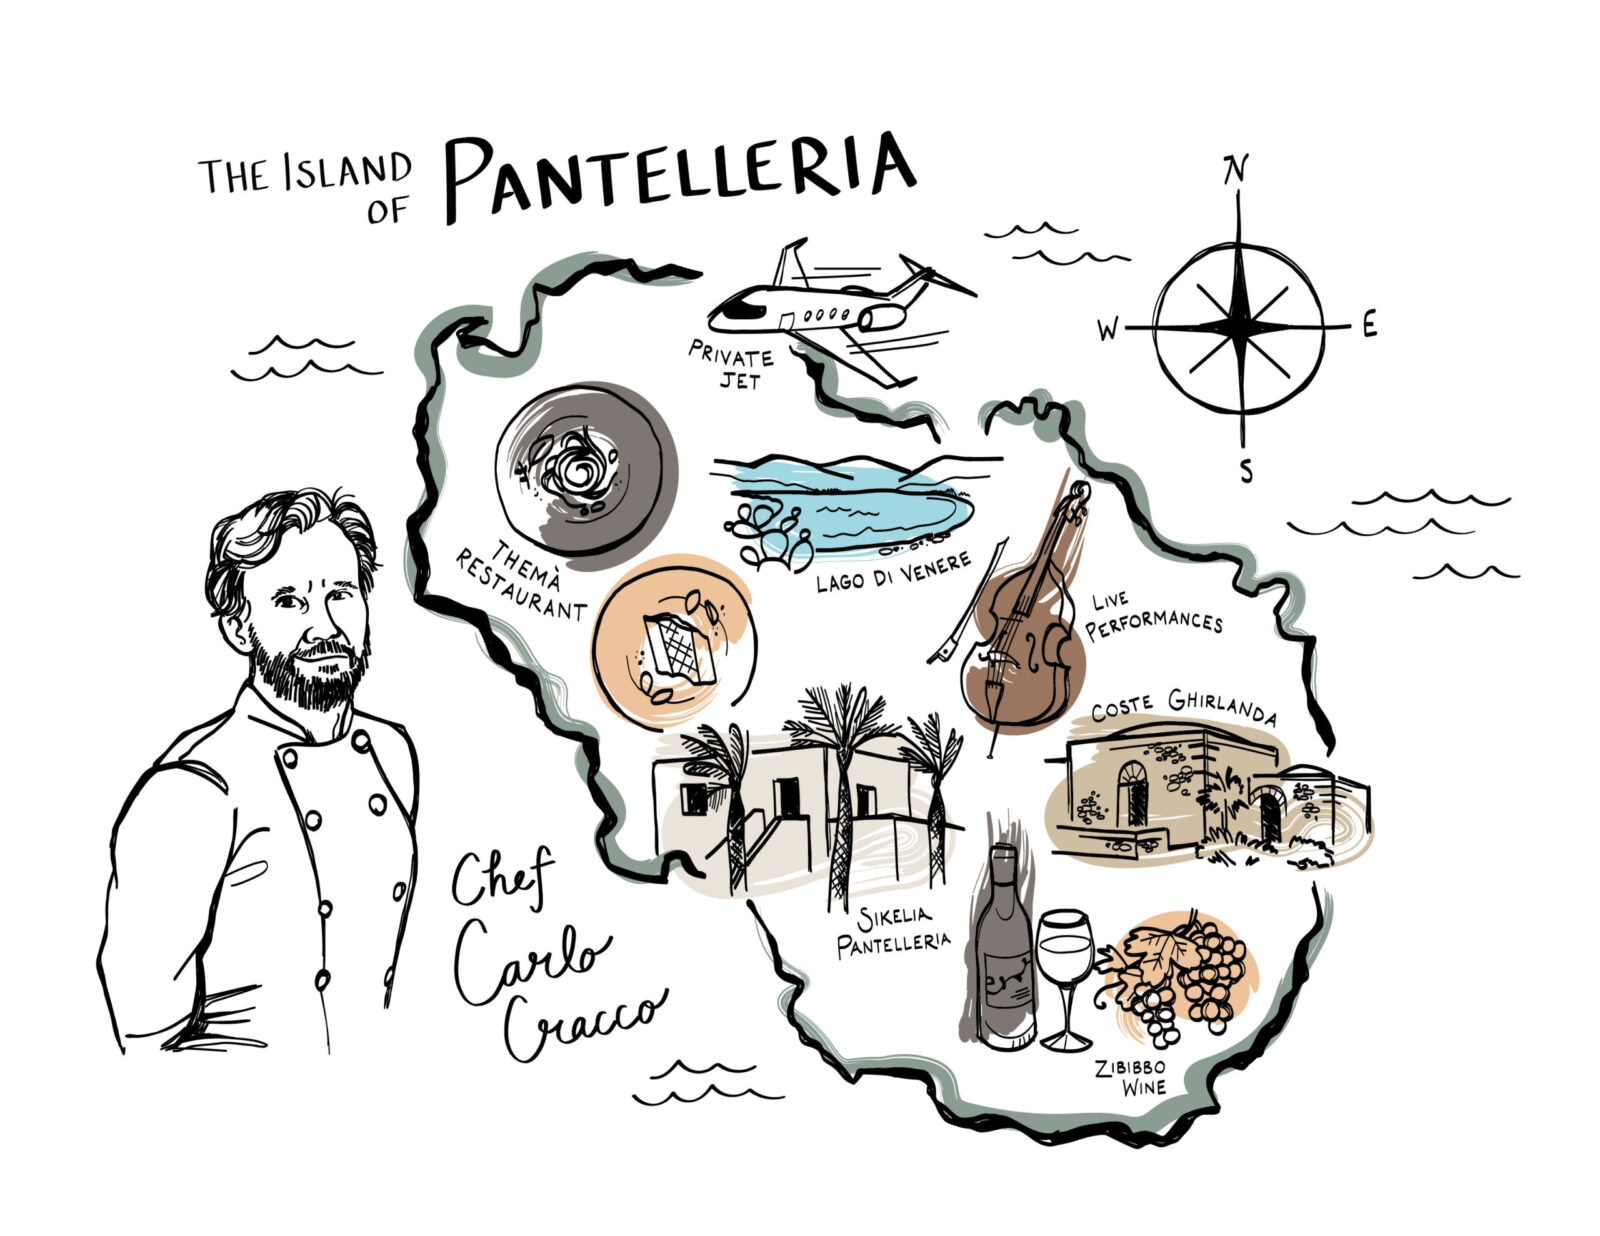 Carlo Cracco Pantelleria Sicily Sikelia scaled - Immerse Yourself in the Majestic World of Italian Cooking Mastery with Italy’s Most Artistic Chef Carlo Cracco